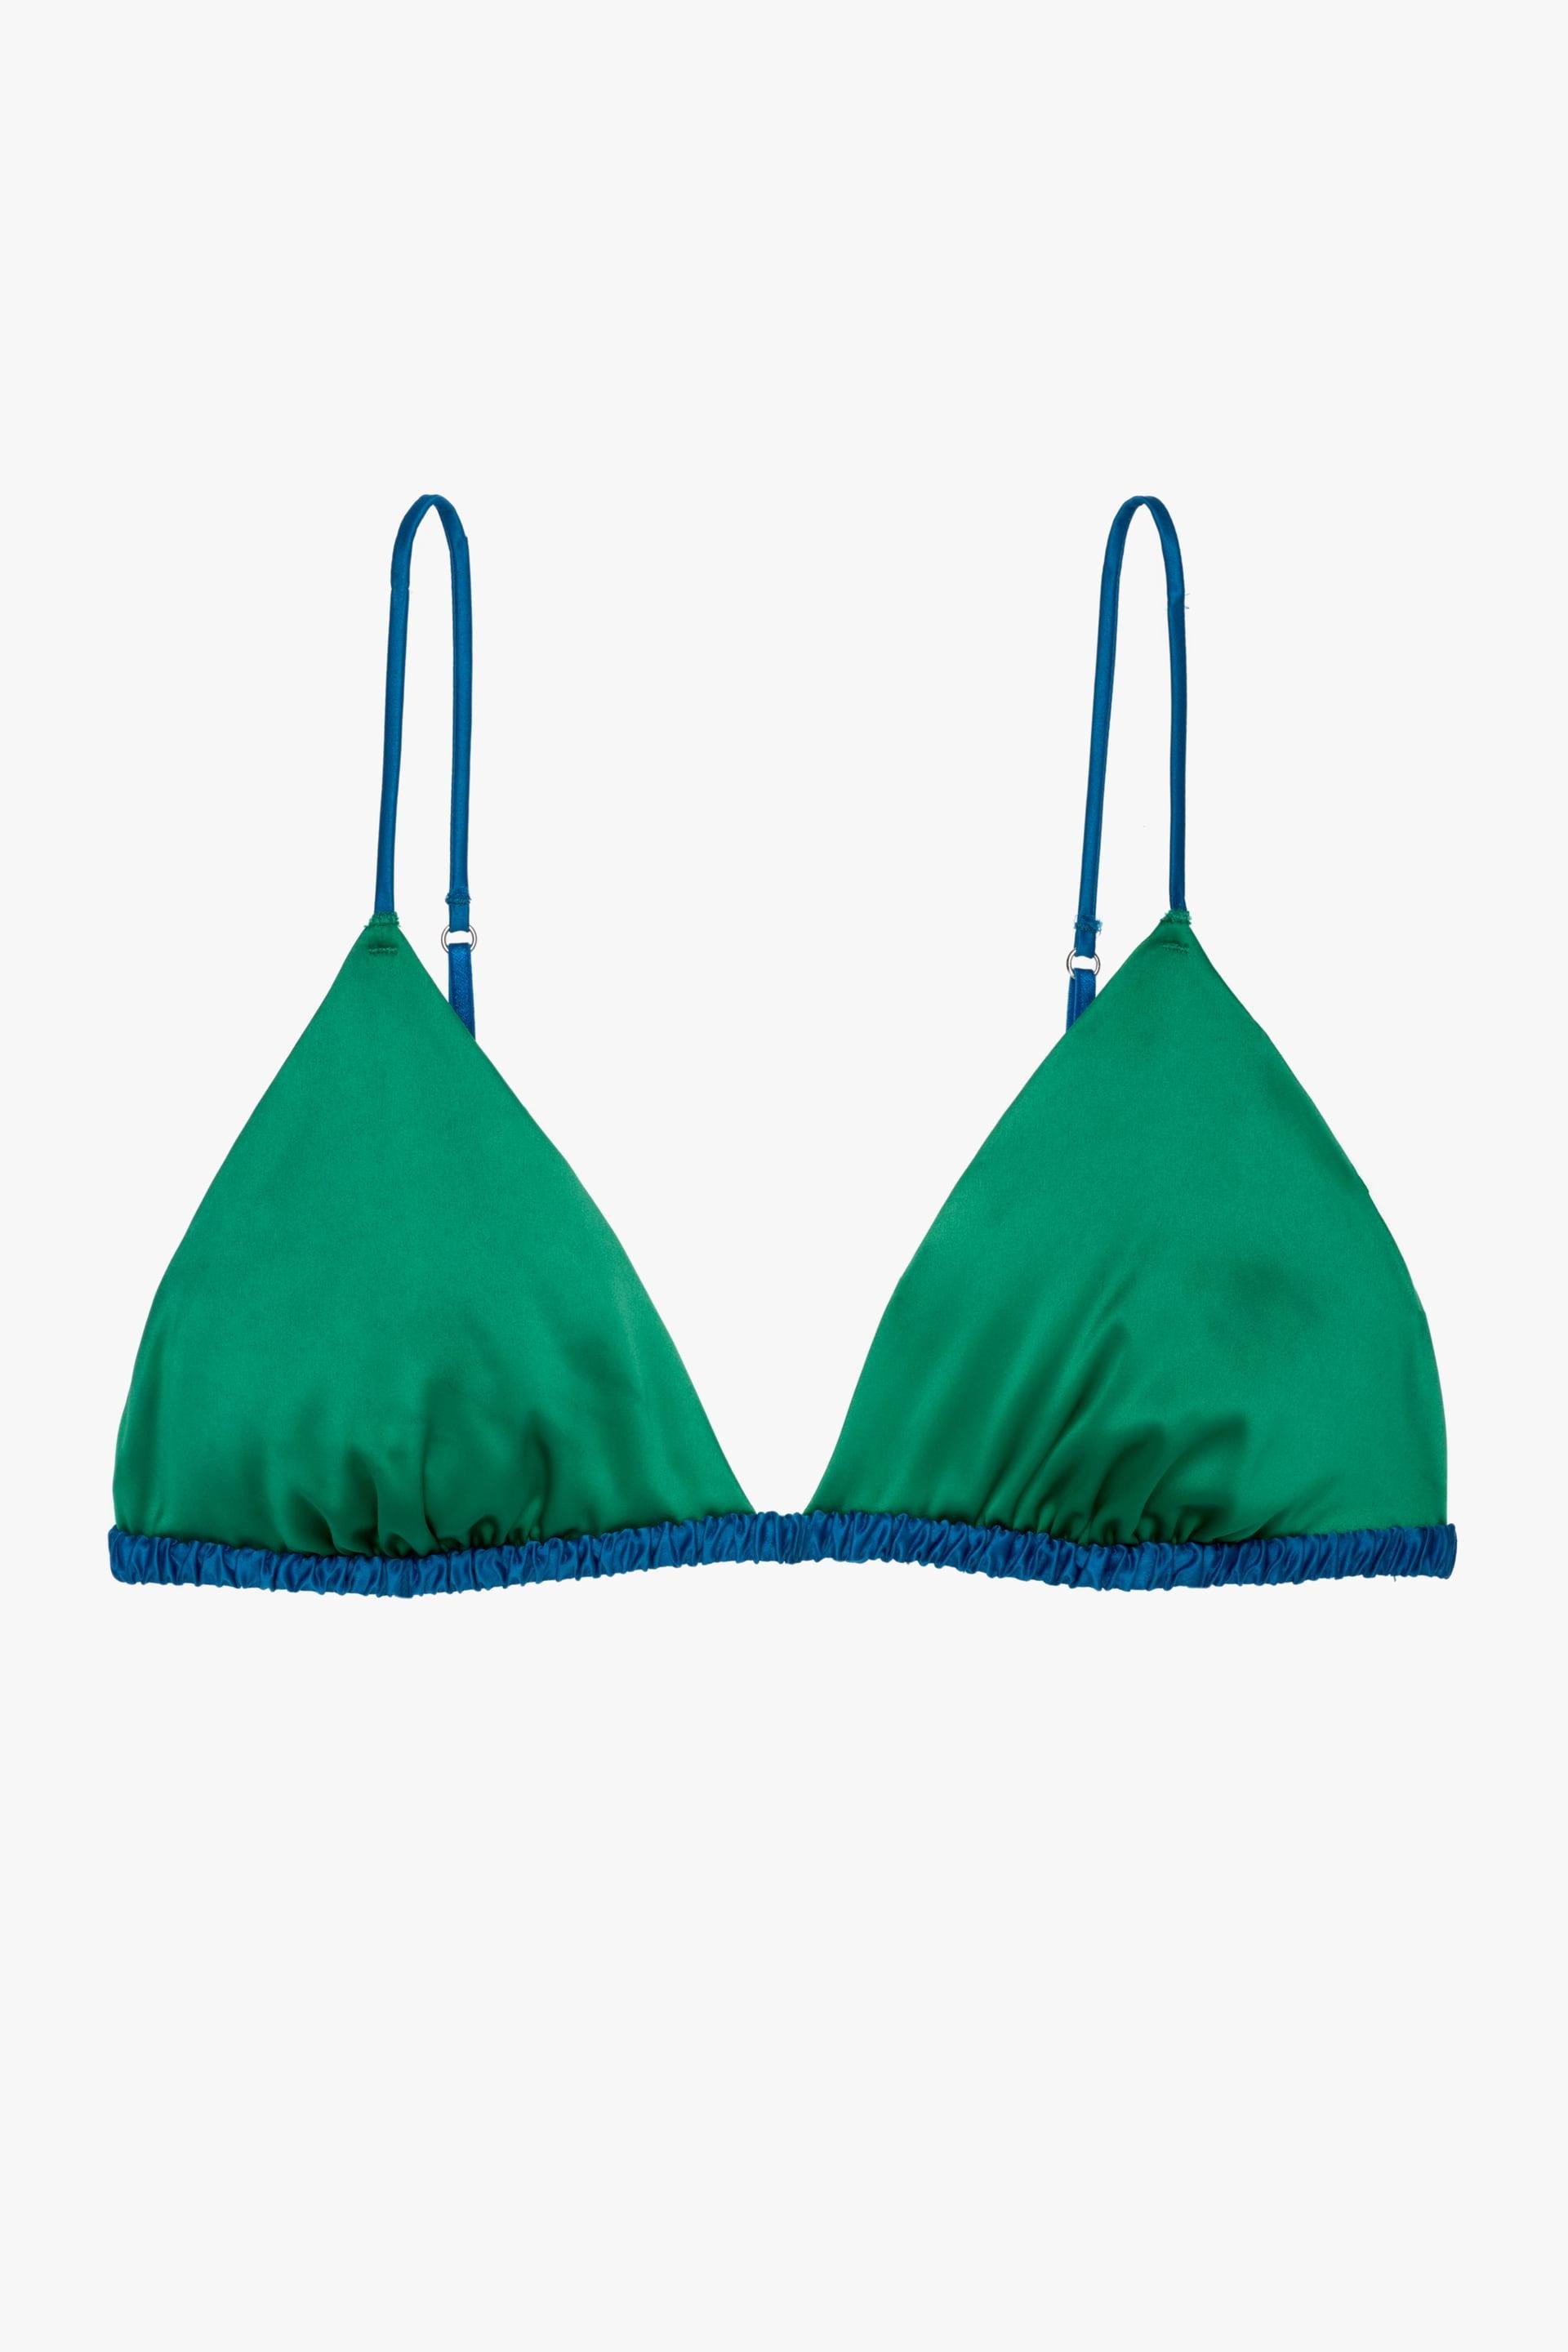 SATIN EFFECT TRIANGLE BRALETTE LIMITED EDITION by ZARA